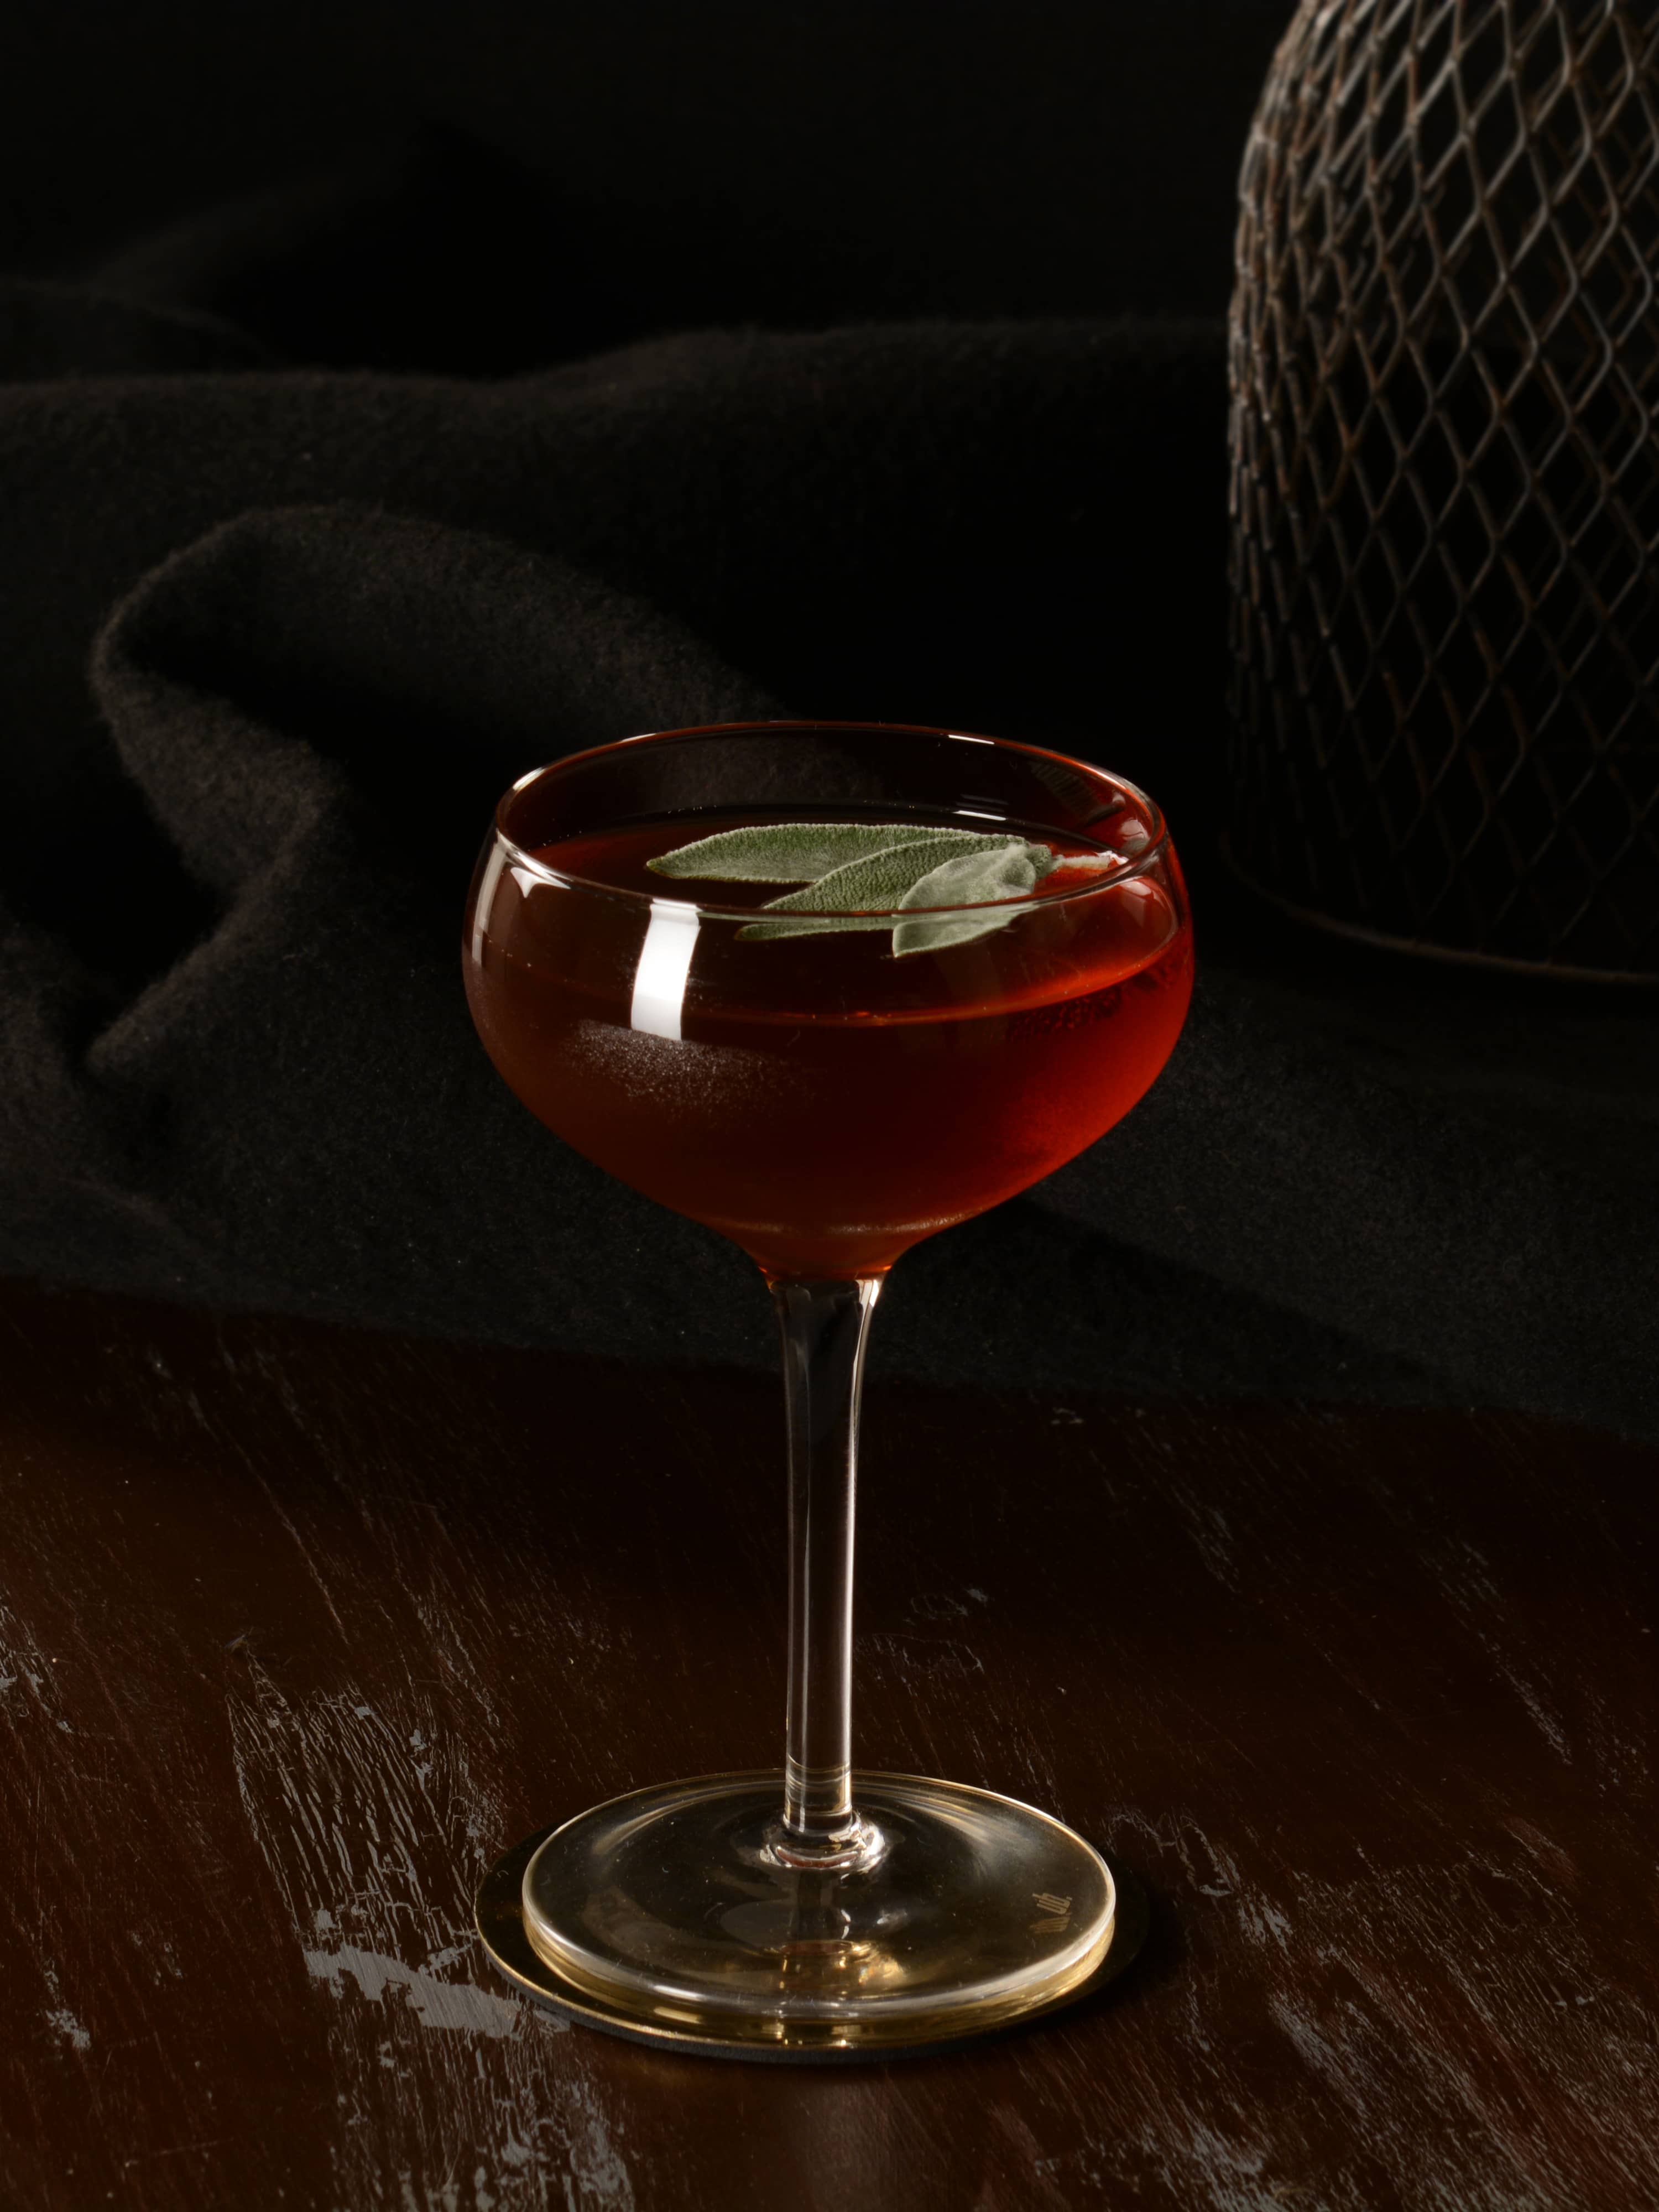 A beautifully outfitted dark red cocktail brought to us by fellow bartenders from Belgium.